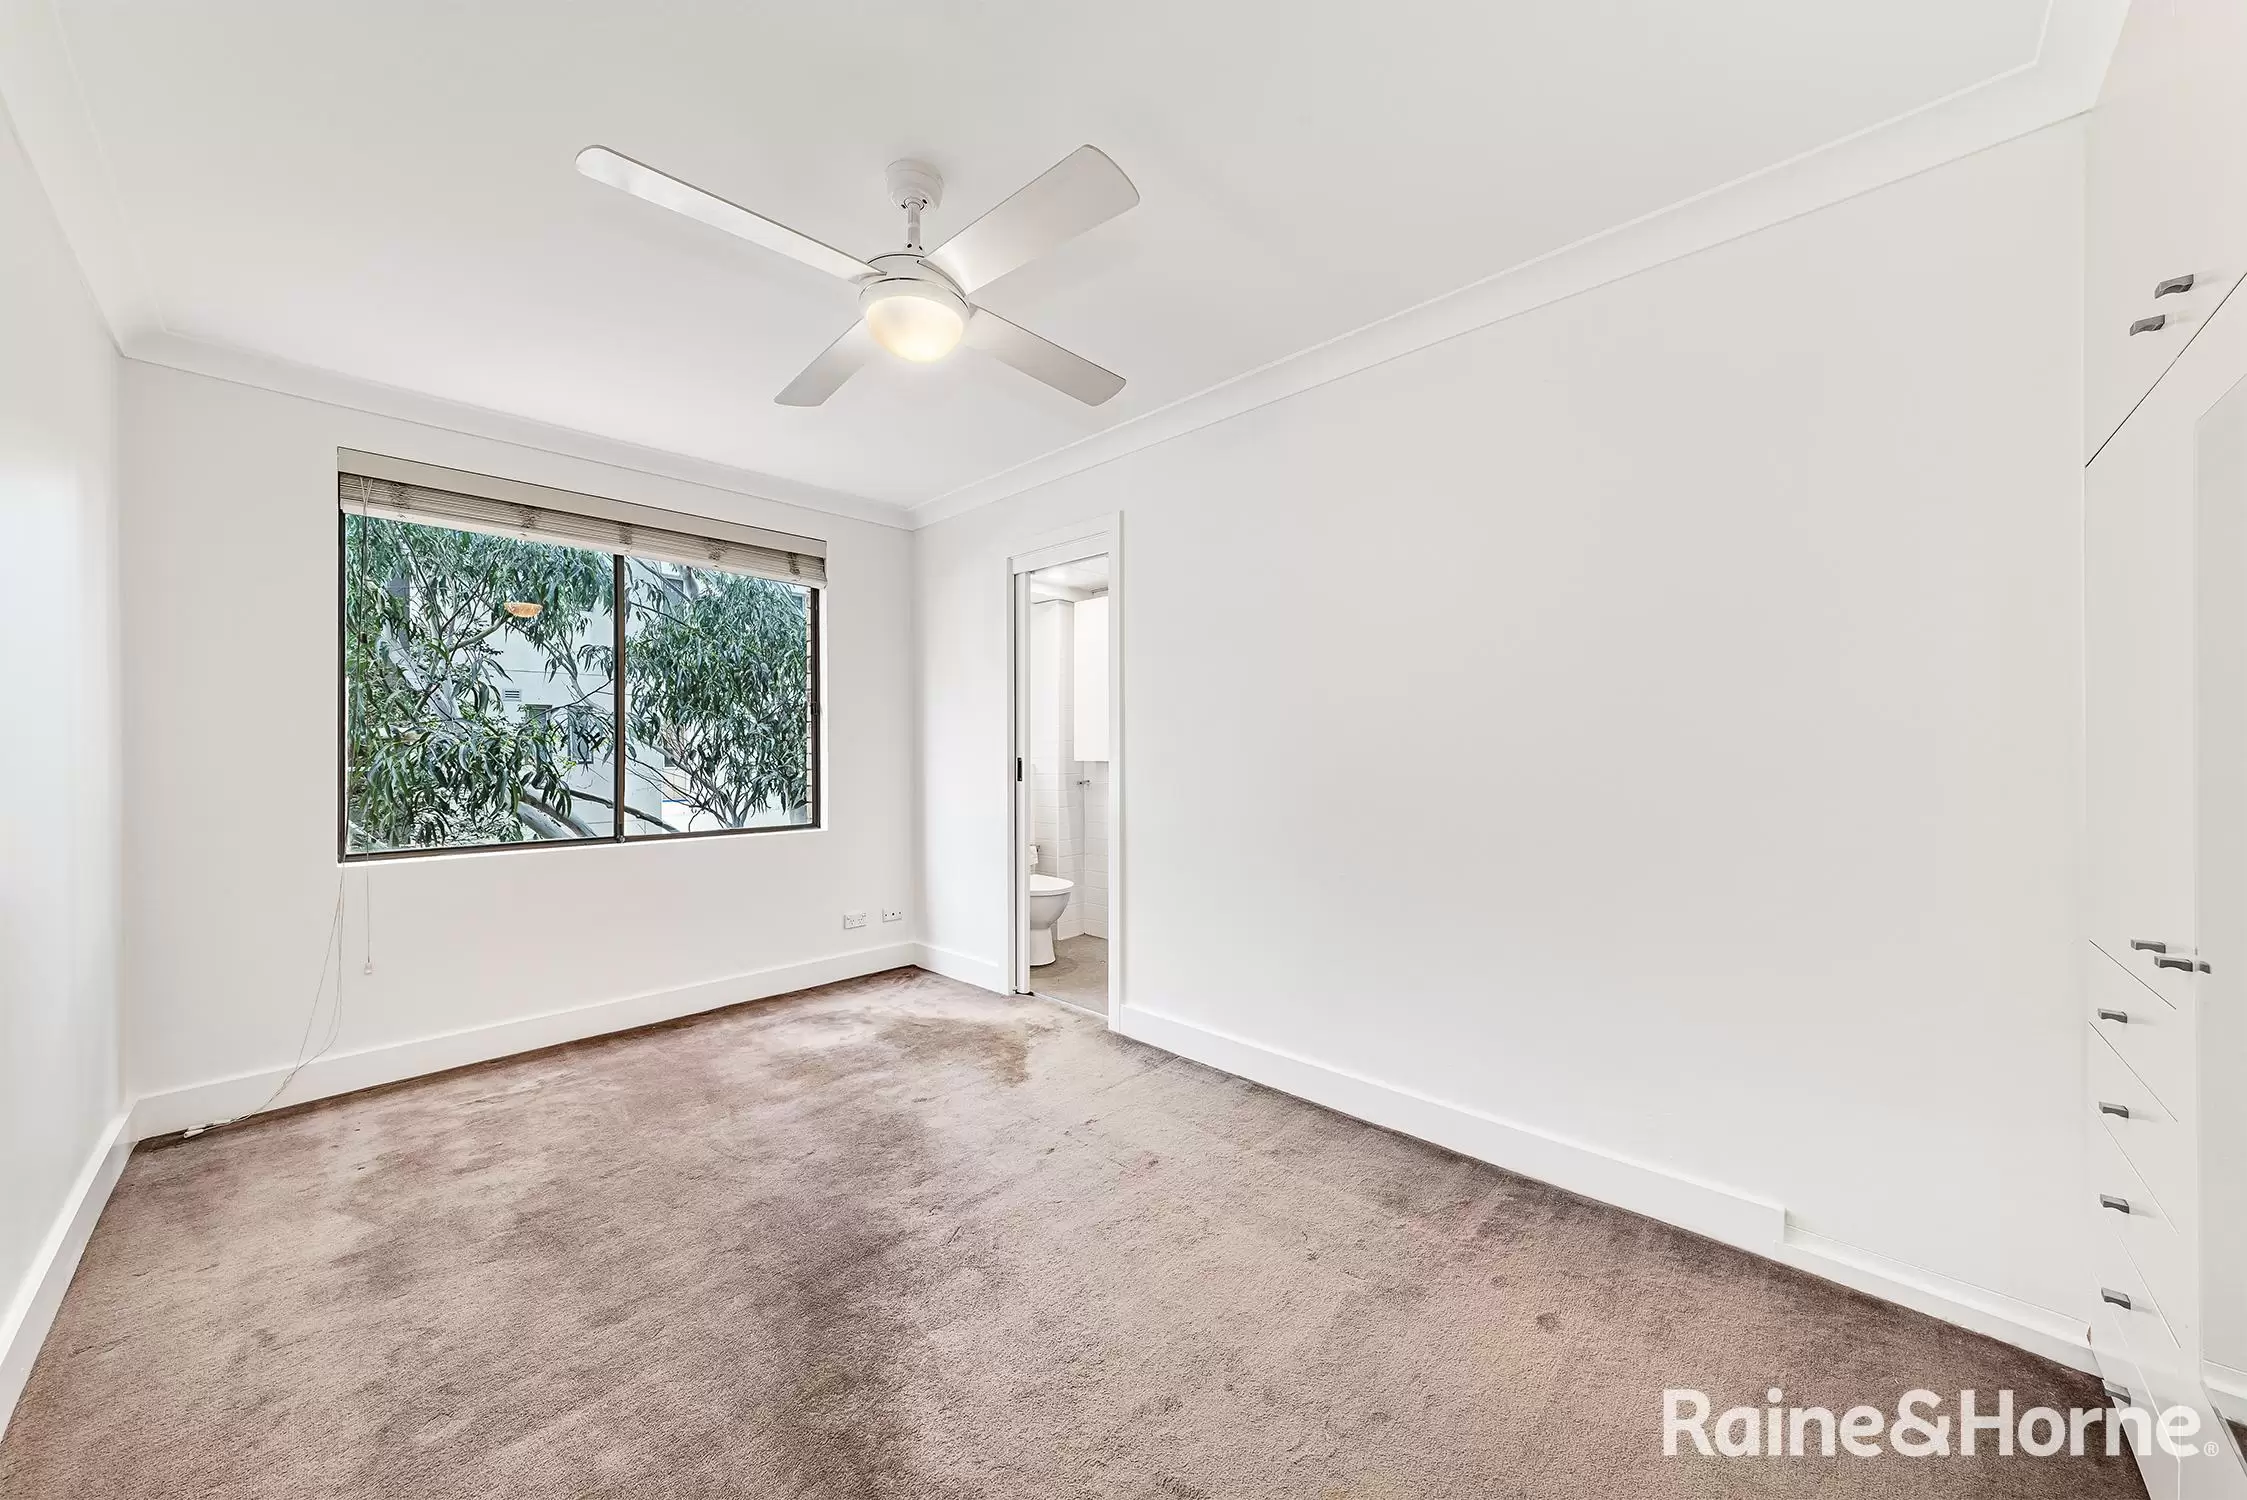 6/84 Melody Street, Coogee For Lease by Raine & Horne Randwick | Coogee - image 5